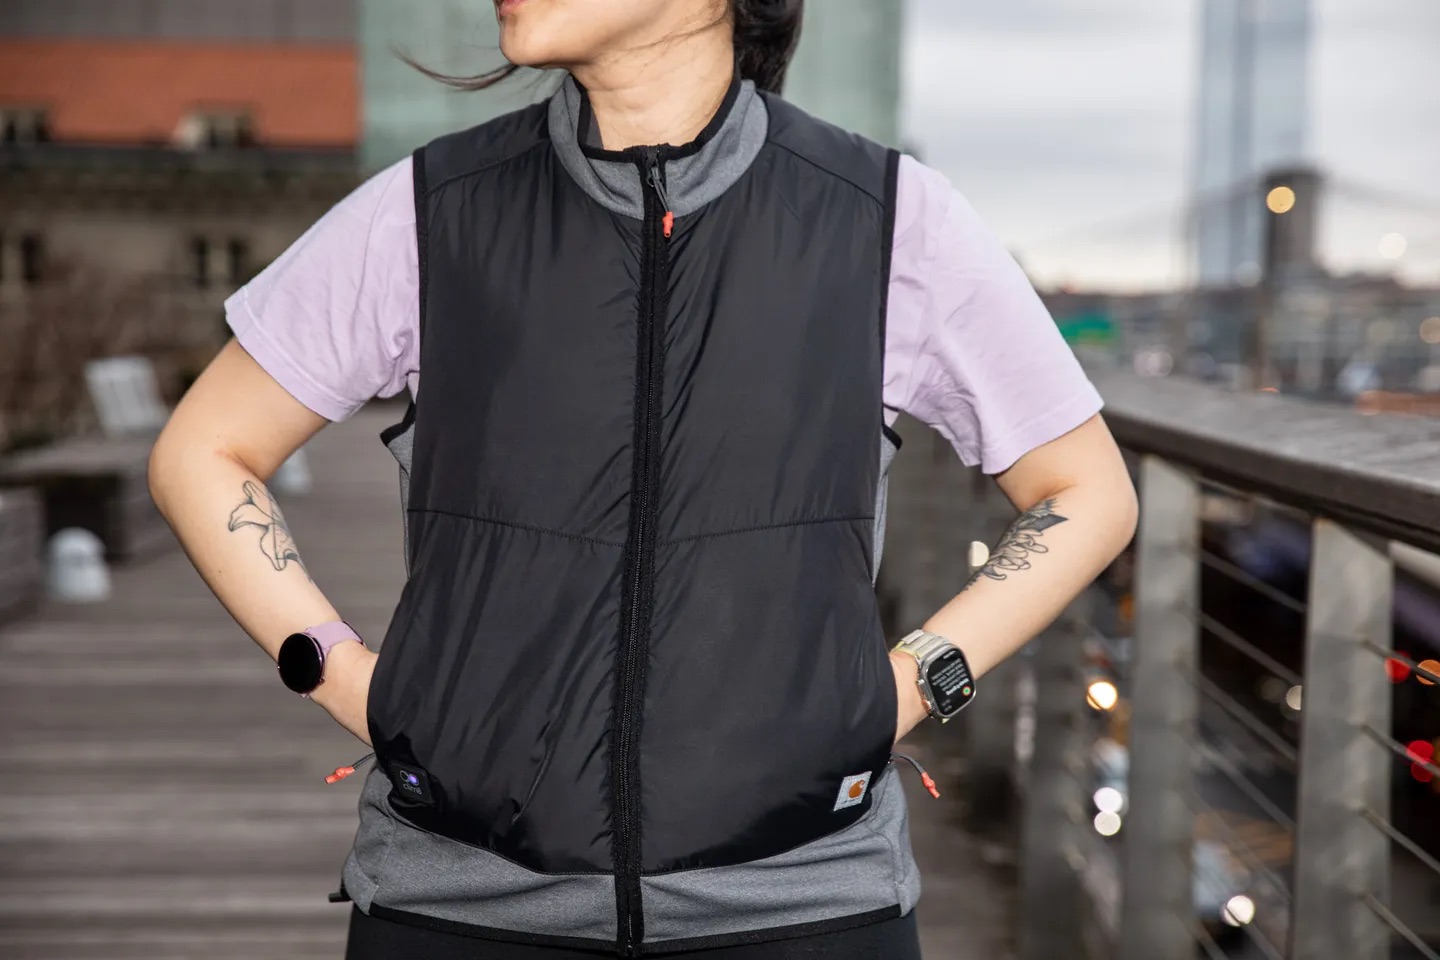 Carhartt X-1: smart vest with heating and AI that automatically adjusts temperature